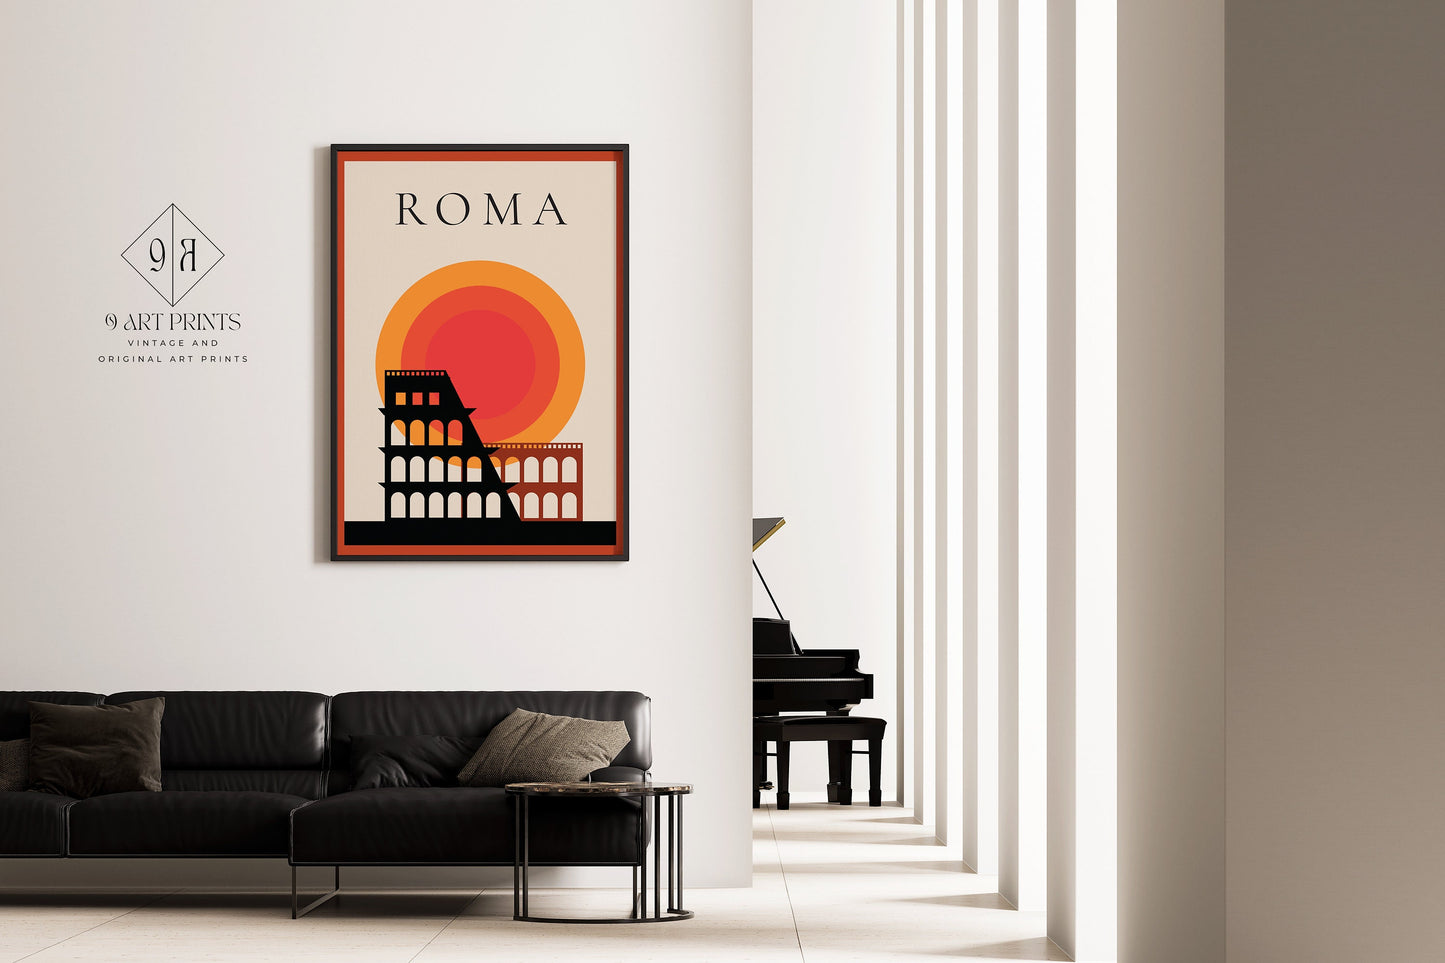 Framed Vintage Travel Poster Rome Italy Retro Art Print Exhibition Poster Portrait Modern Gallery Framed Ready to Hang Home Office Decor